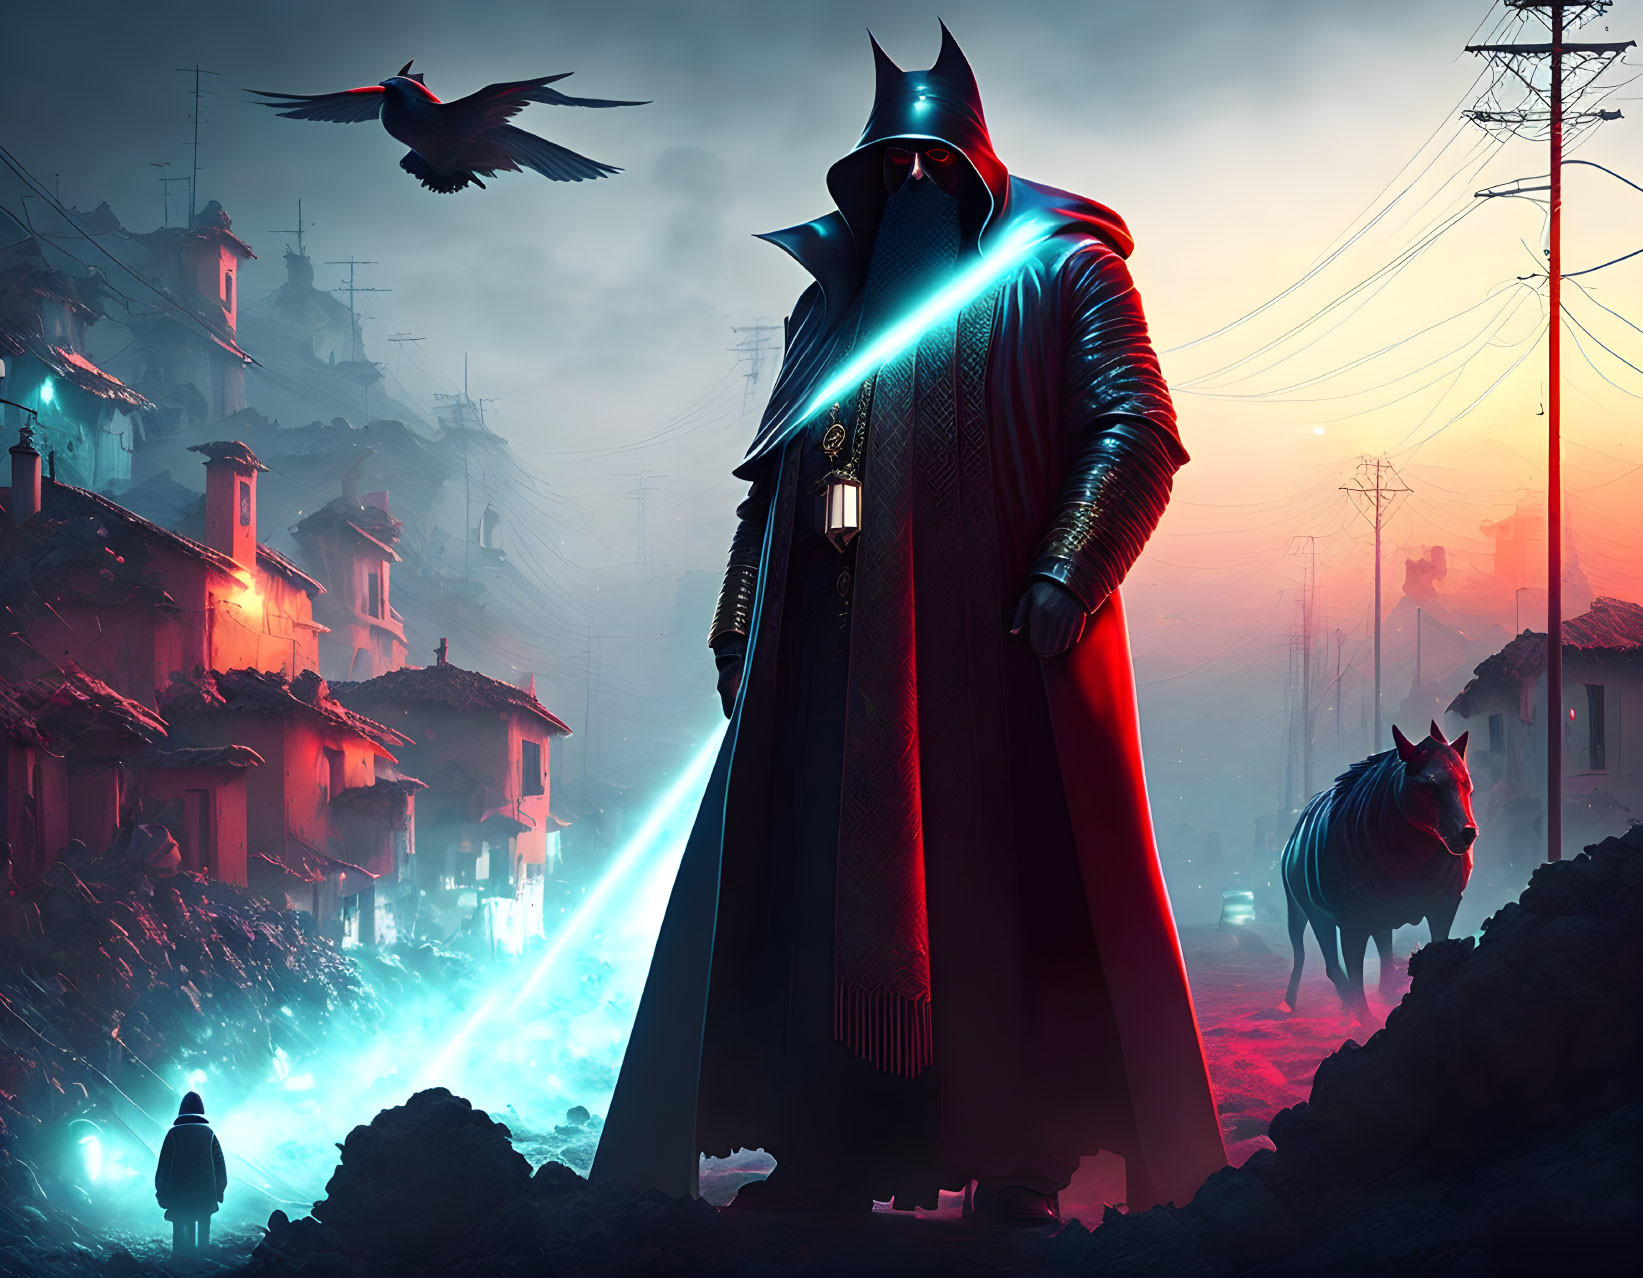 Cloaked figure with glowing blue sword in dystopian town with bird and wolf under dusky sky